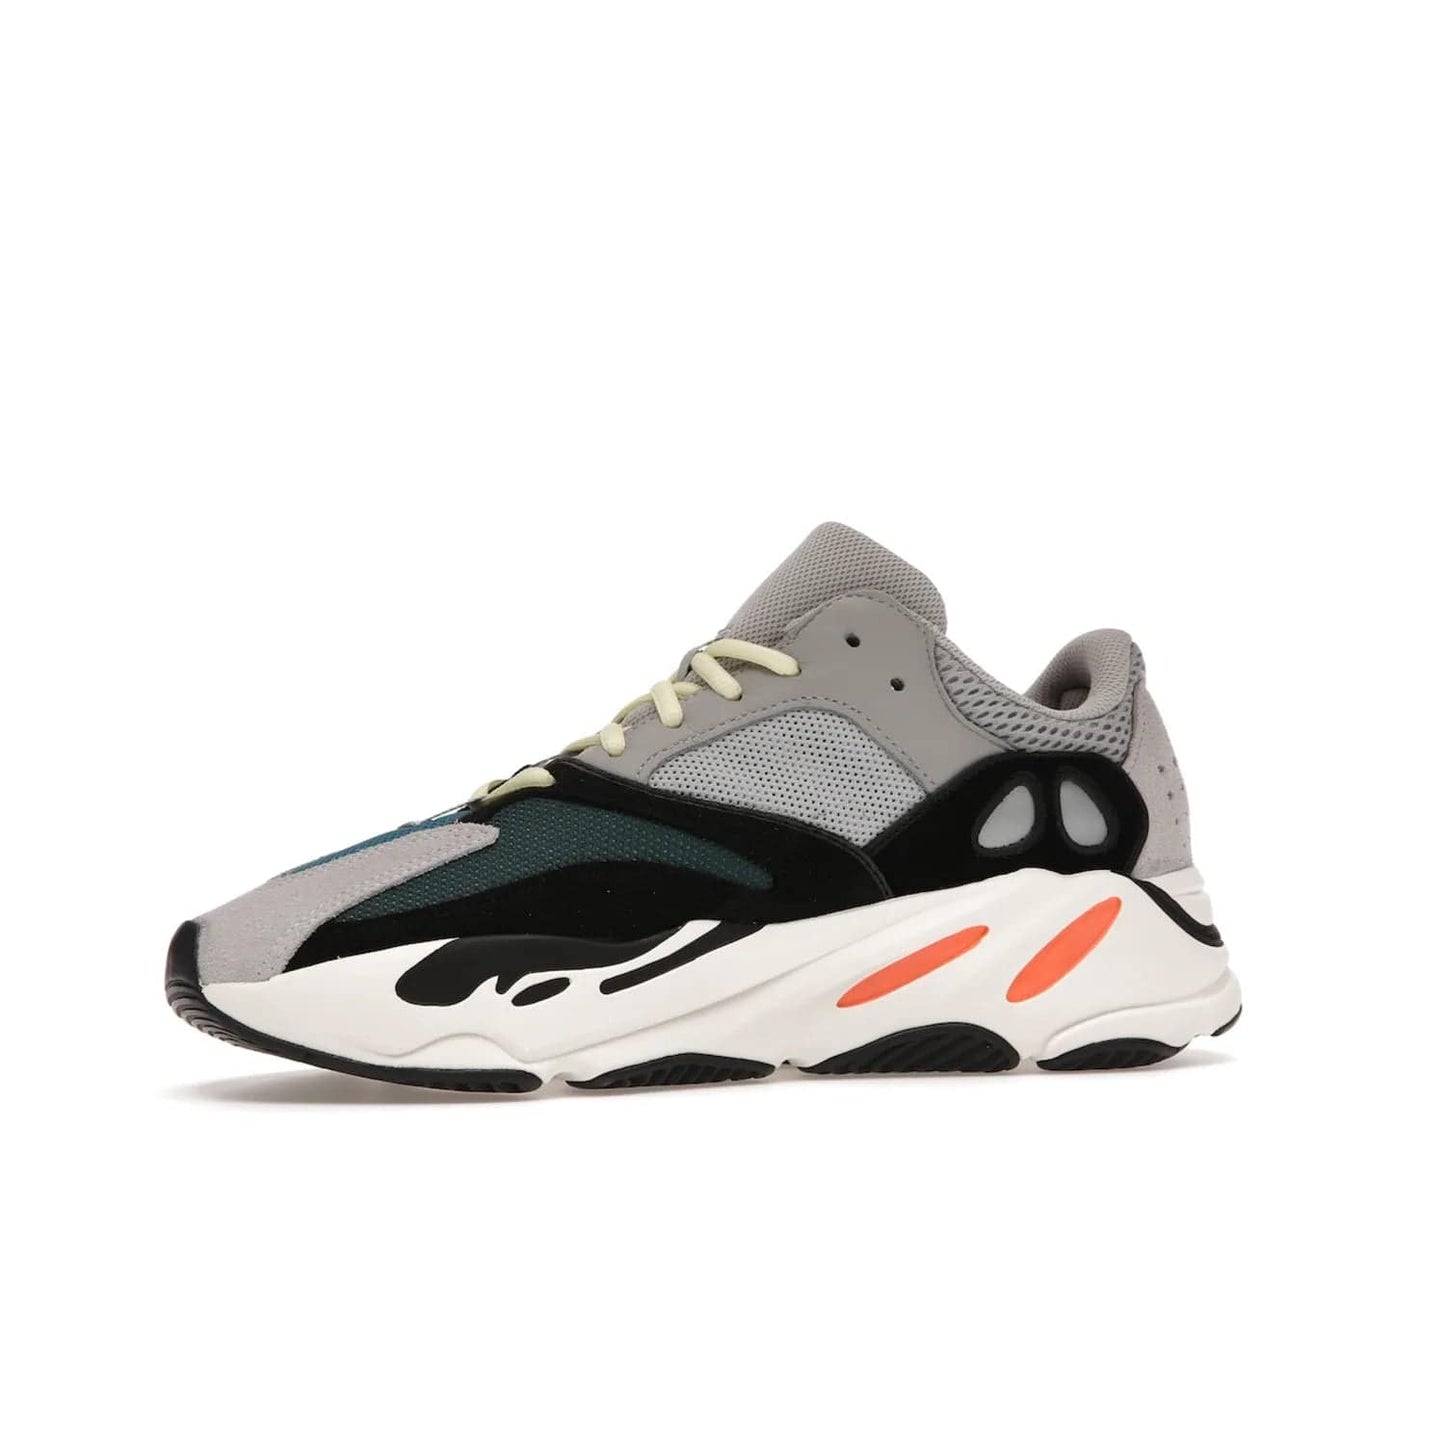 adidas Yeezy Boost 700 Wave Runner - Image 17 - Only at www.BallersClubKickz.com - Shop the iconic adidas Yeezy Boost 700 Wave Runner. Featuring grey mesh and leather upper, black suede overlays, teal mesh underlays, and signature Boost sole. Be bold & make a statement.